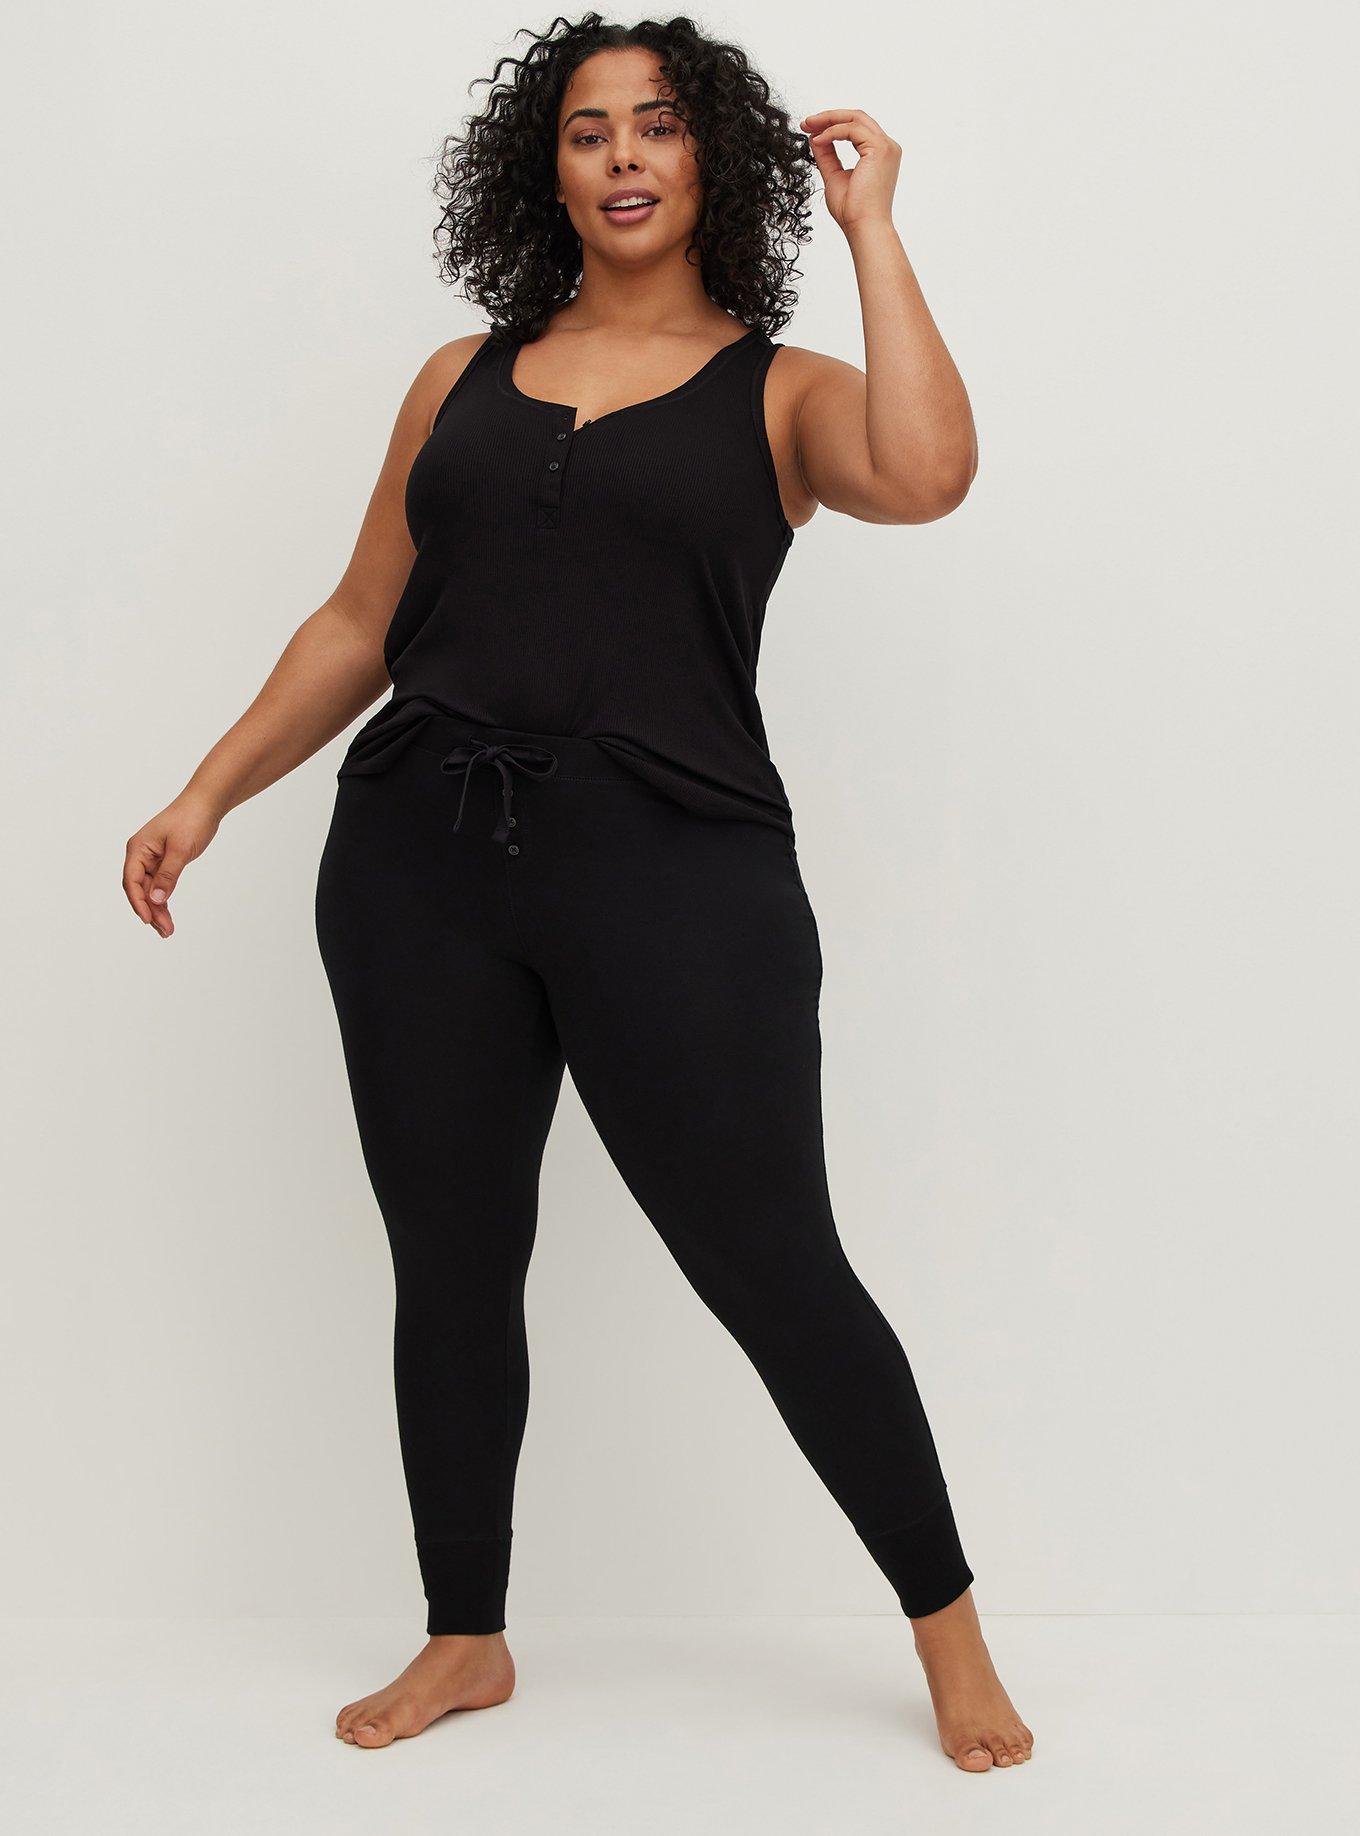 Popular Womens Plus Size Leggings - Cotton Full Length Womens Leggings Plus  Size. Great for Gym, Workout, Or Yoga. 1X-5X, Black, 1X : :  Clothing, Shoes & Accessories